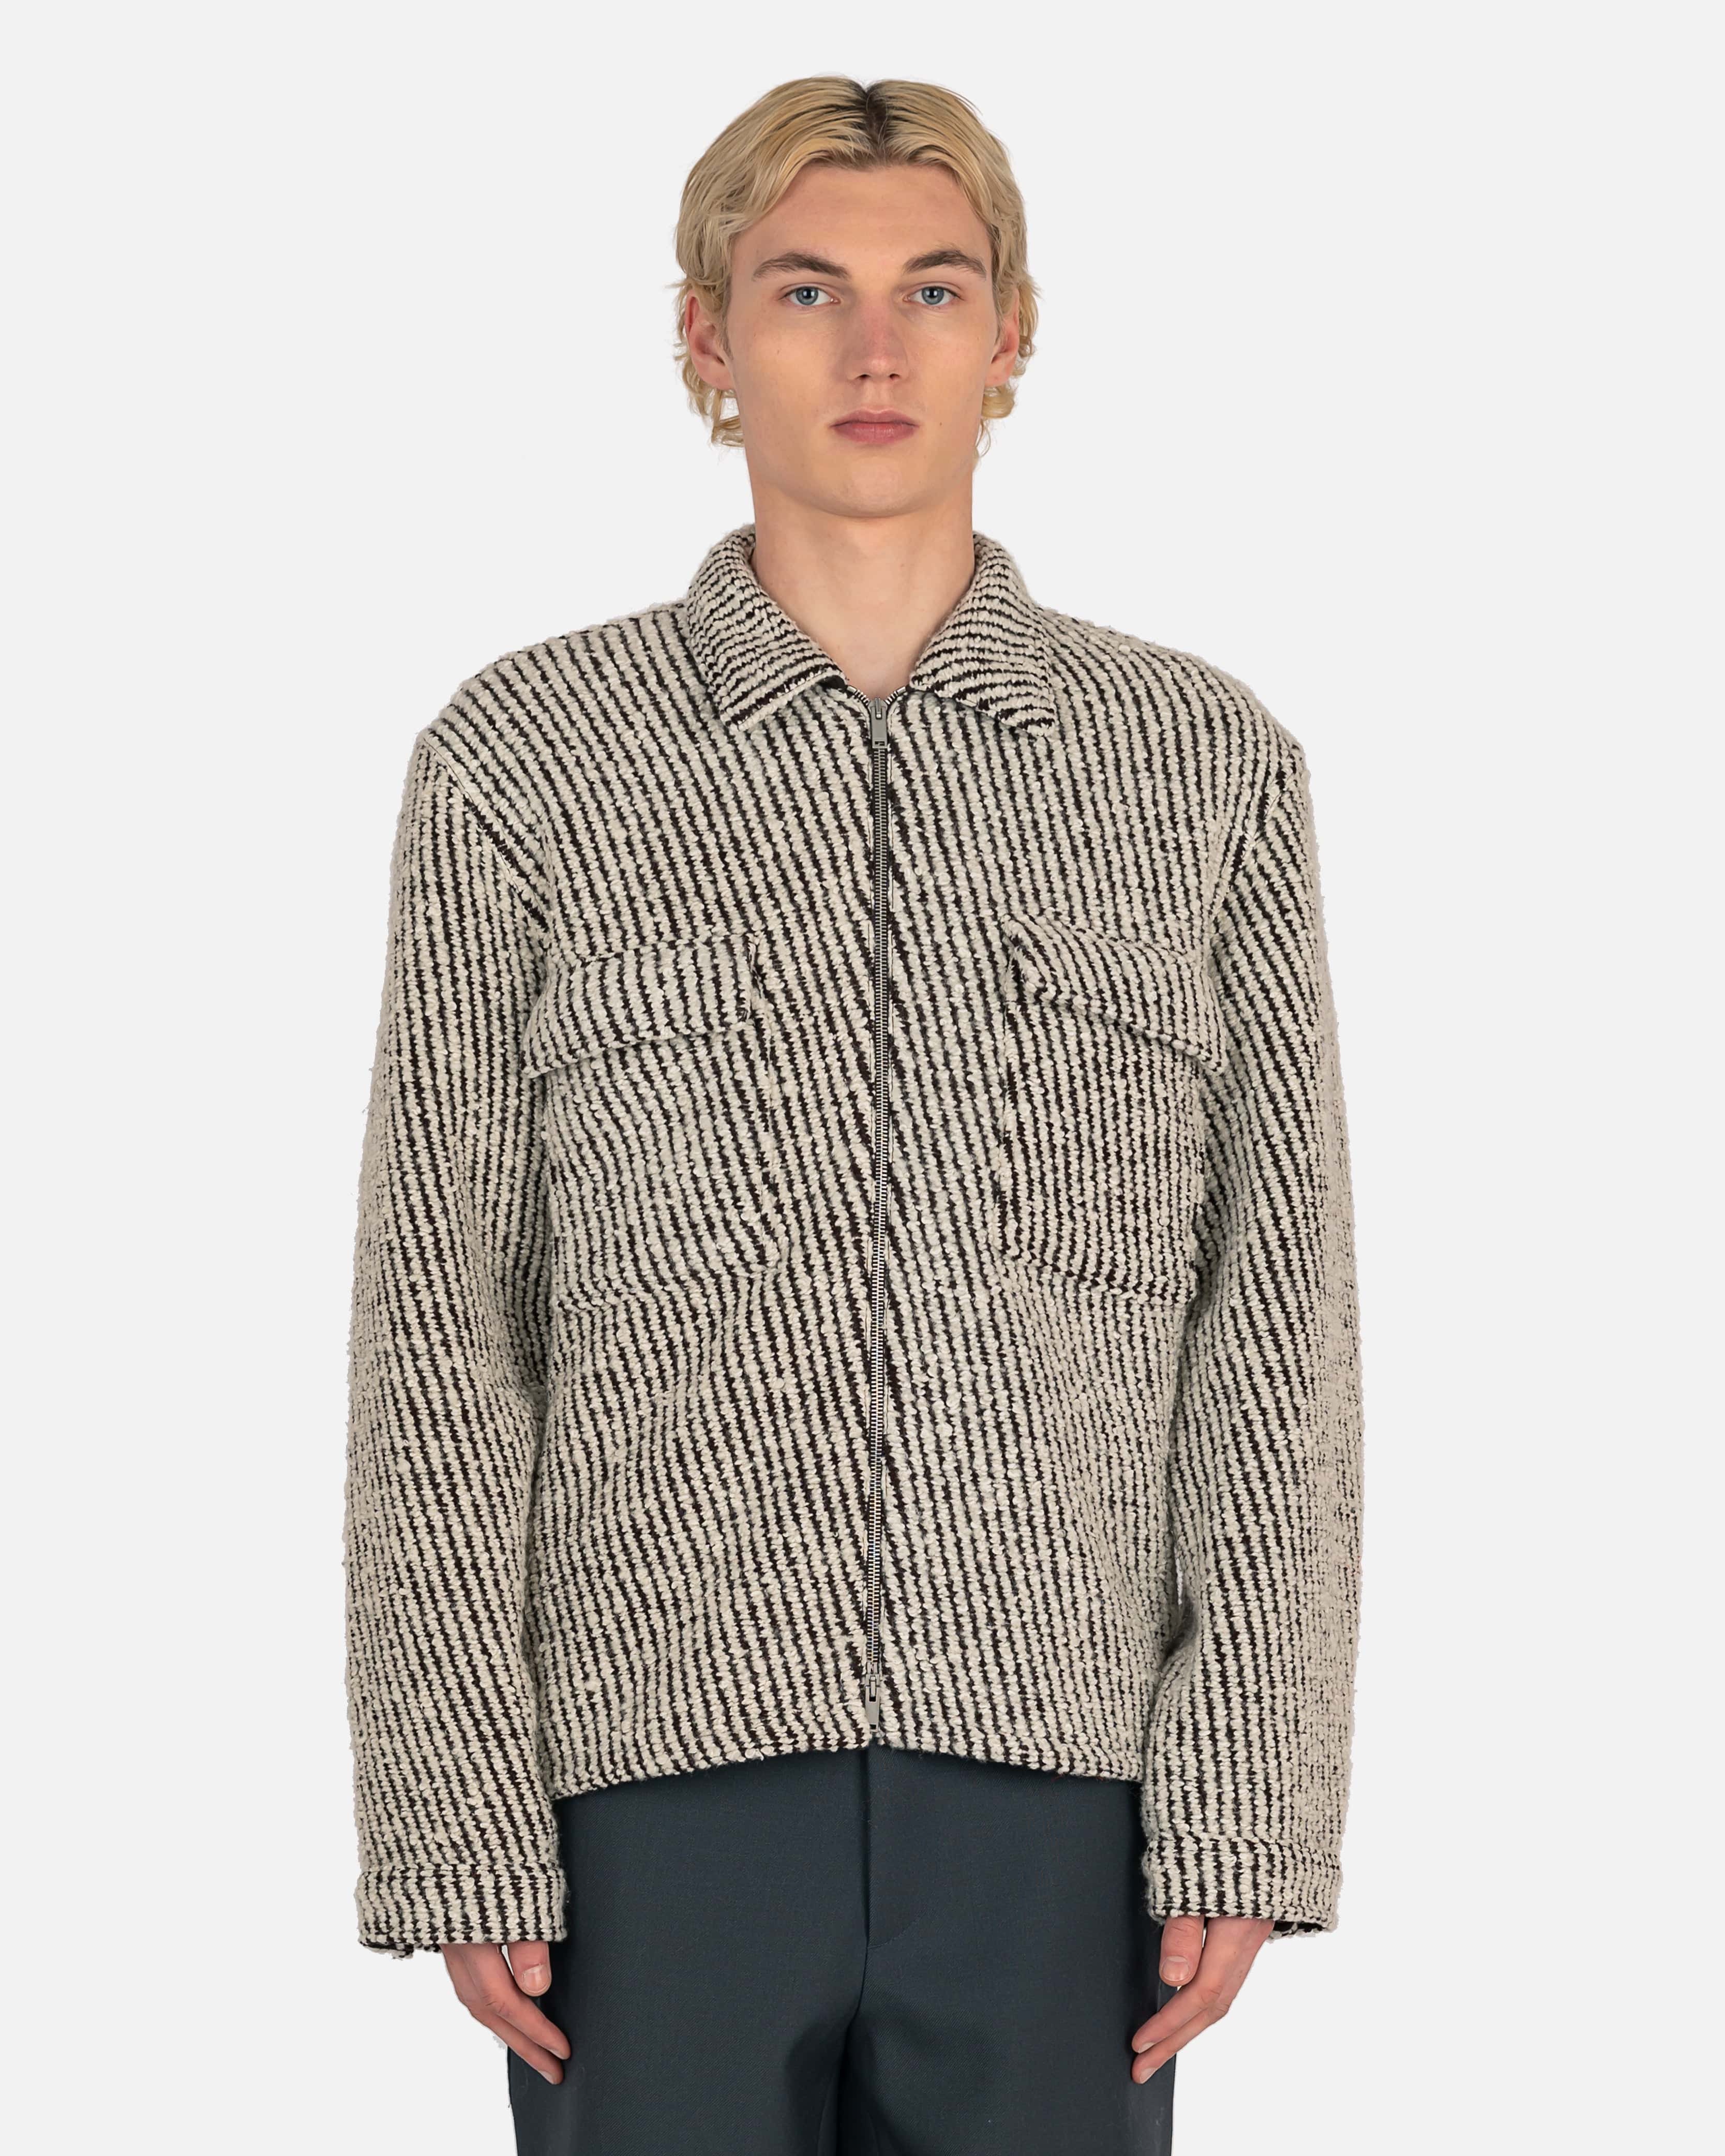 Jacquard in SVRN Open White Shirt – Knit